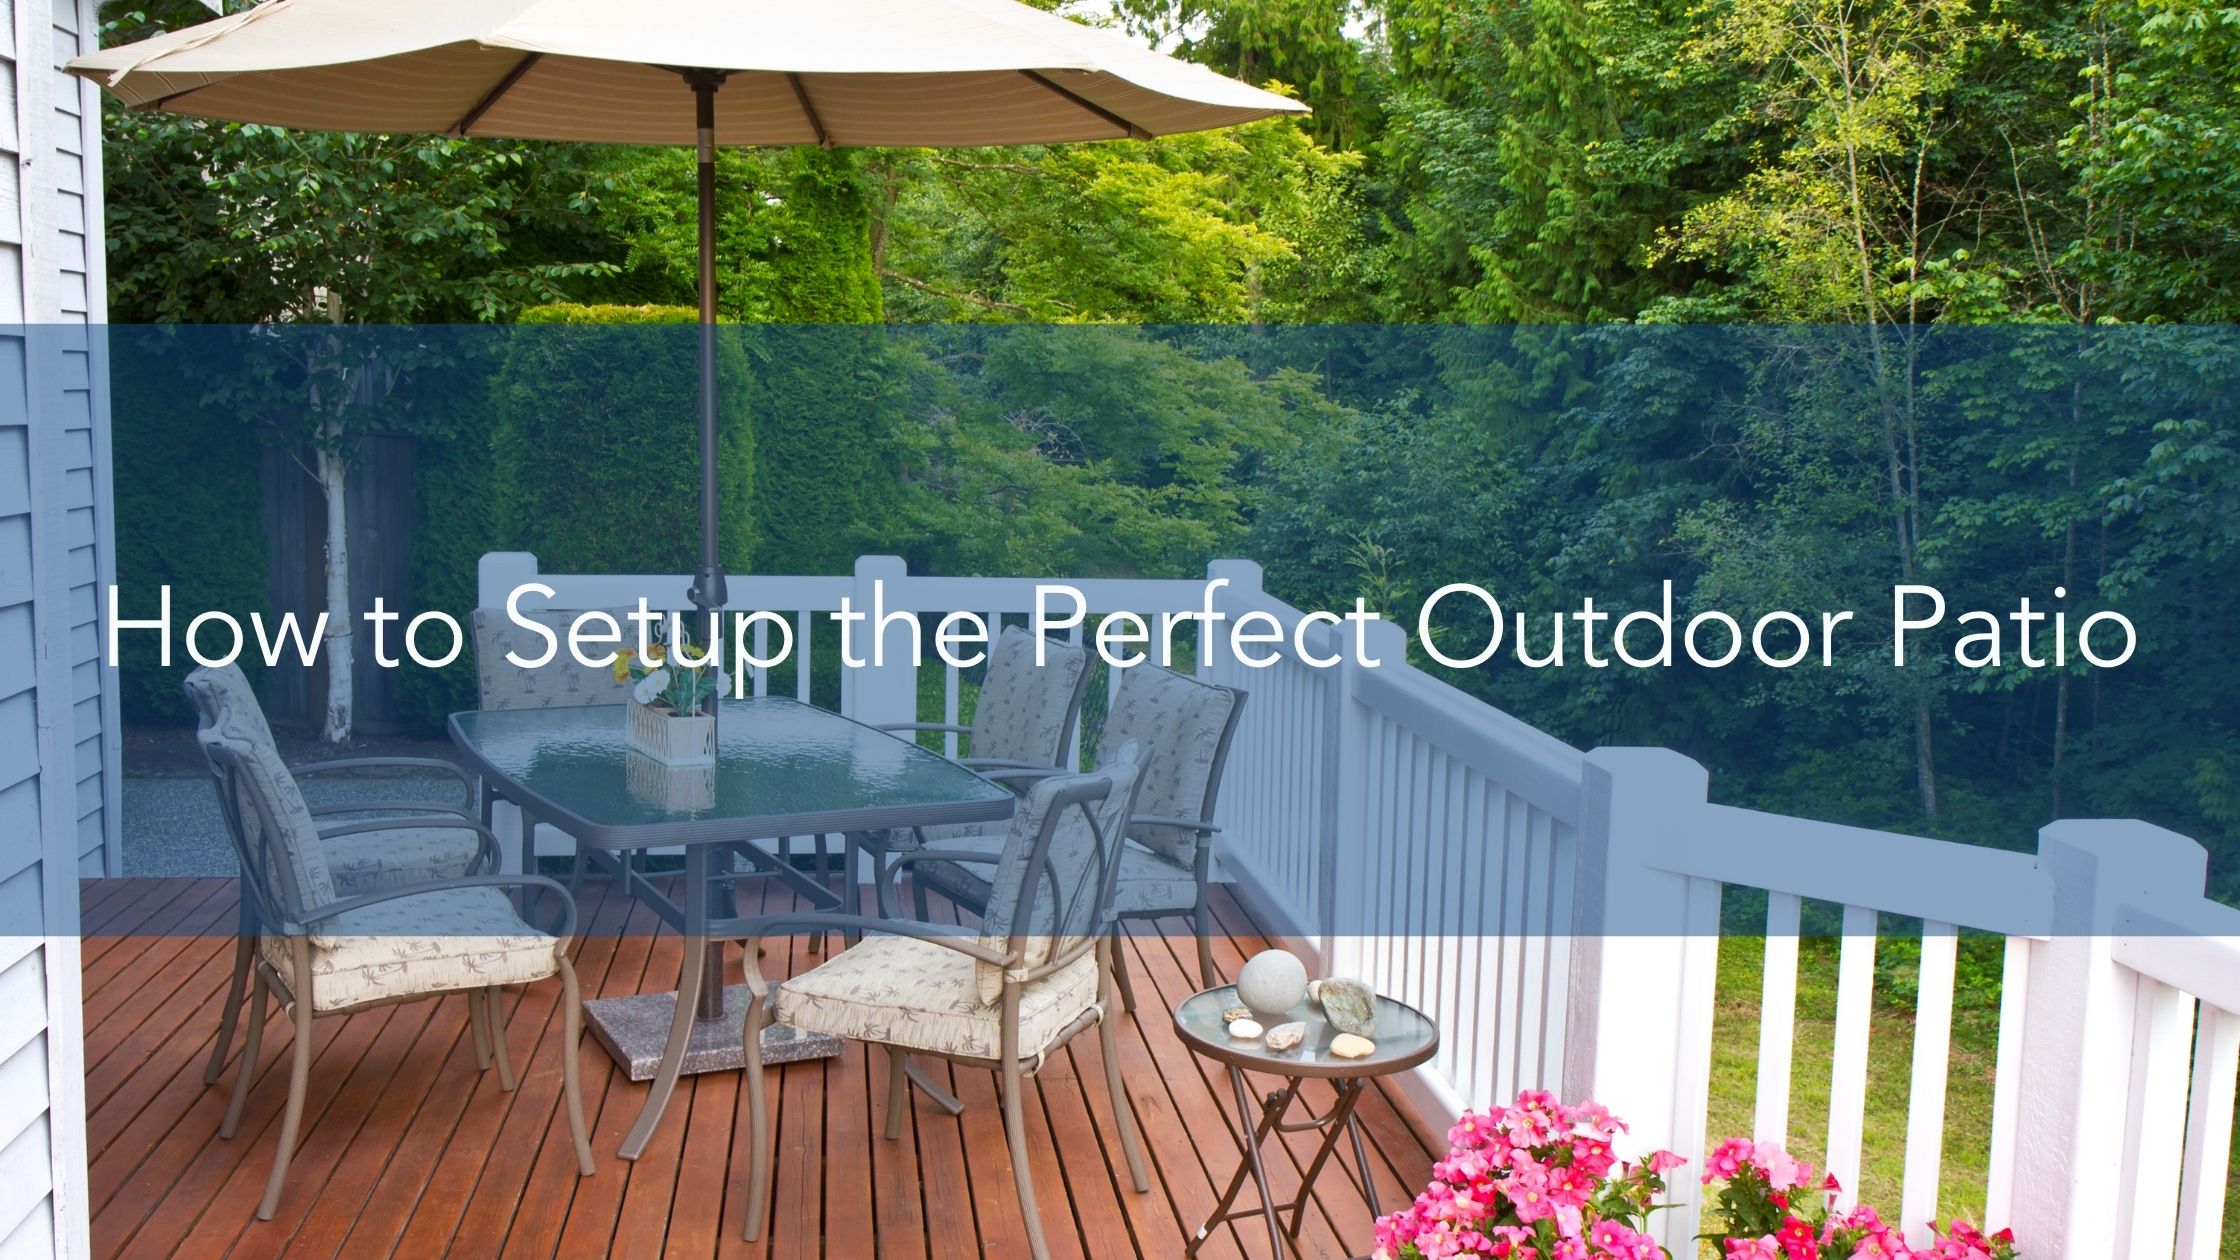 https://雷竞技下载链接官网appwww.explorizers.com/wp-content/uploads/2022/05/How-to-Setup-the-Perfect-Outdoor-Patio.jpg